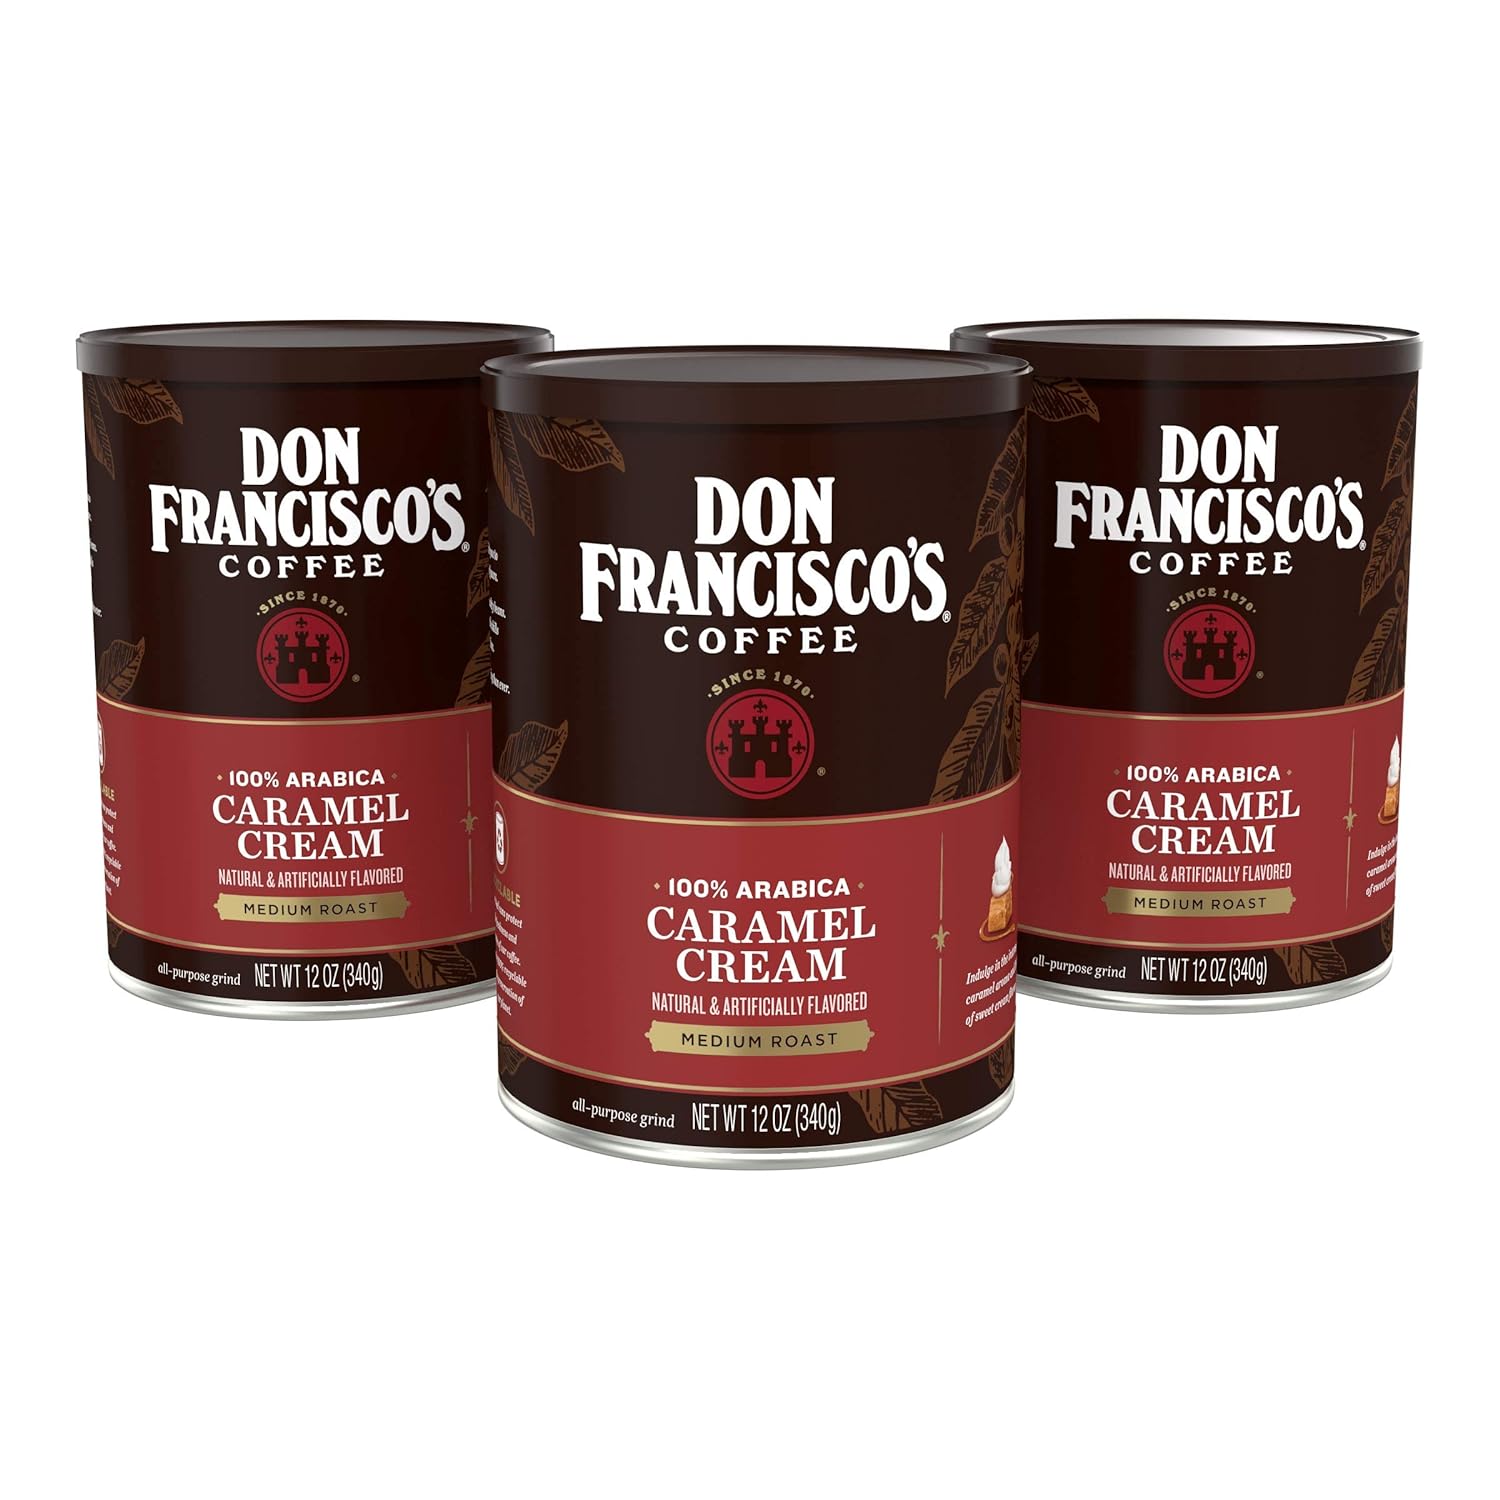 Don Francisco's Caramel Cream Flavored Ground Coffee (3 x 12 oz Cans)